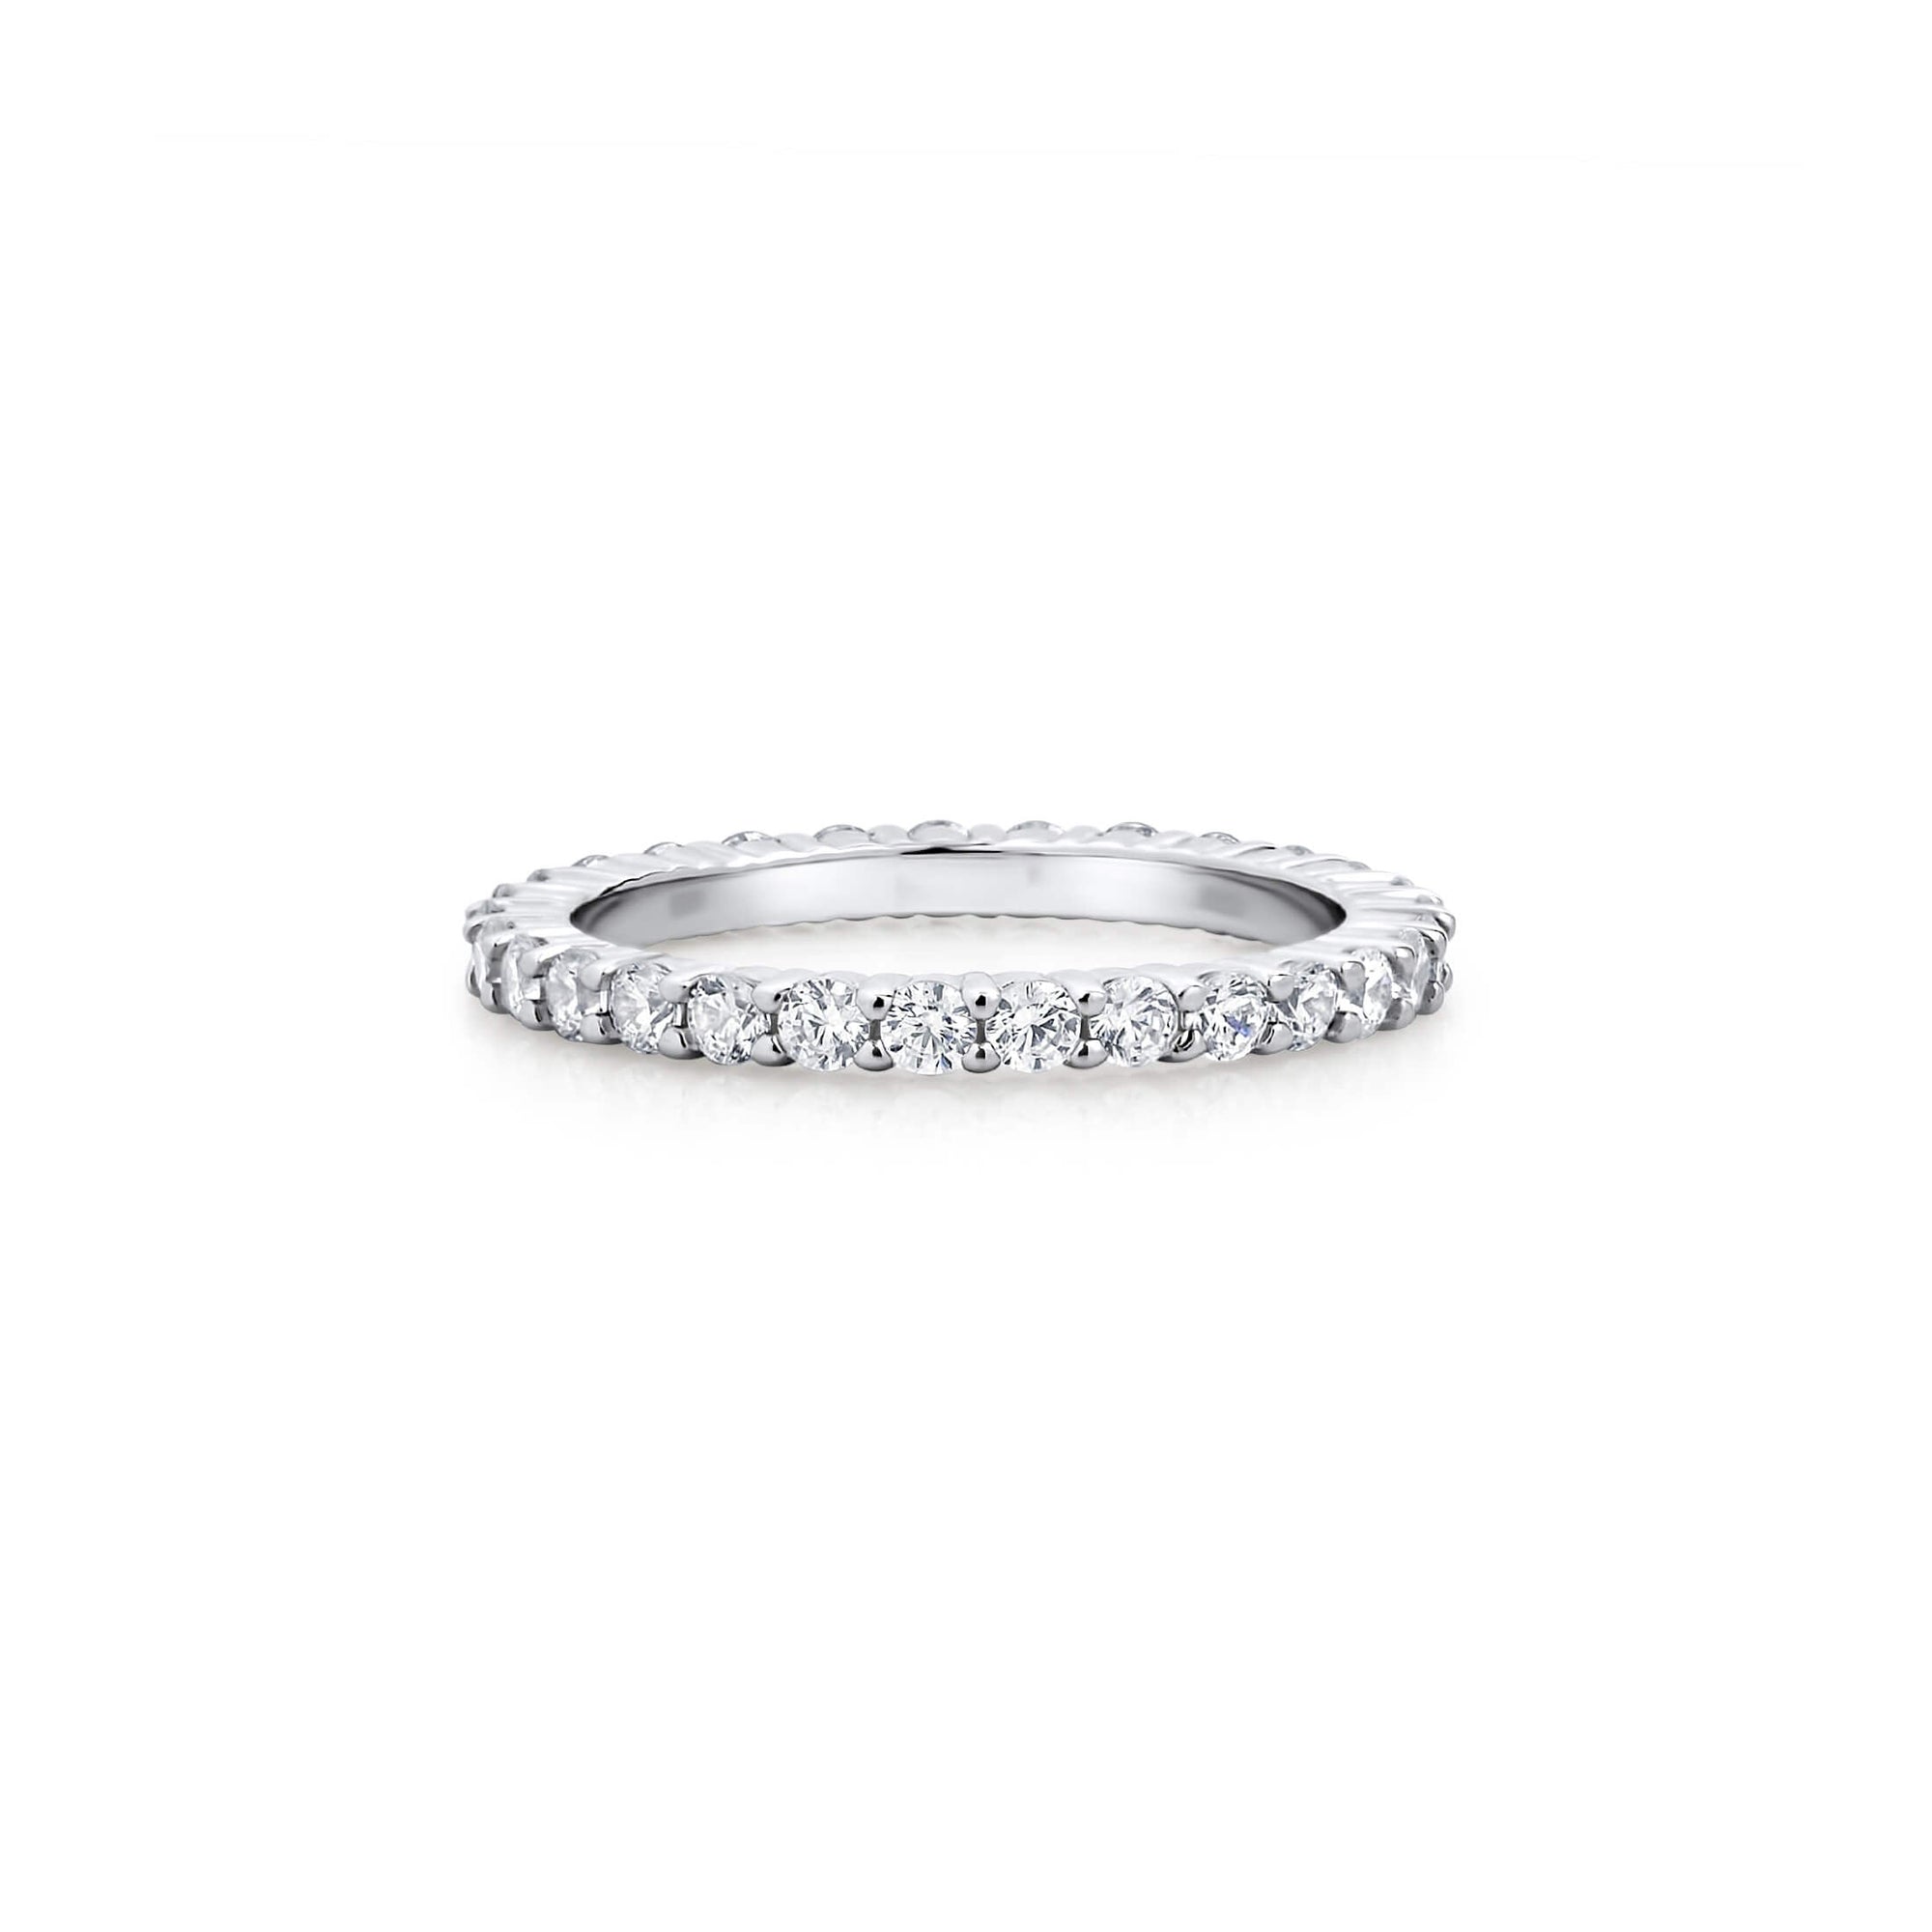 ETERNITY BAND - Trove & Co.